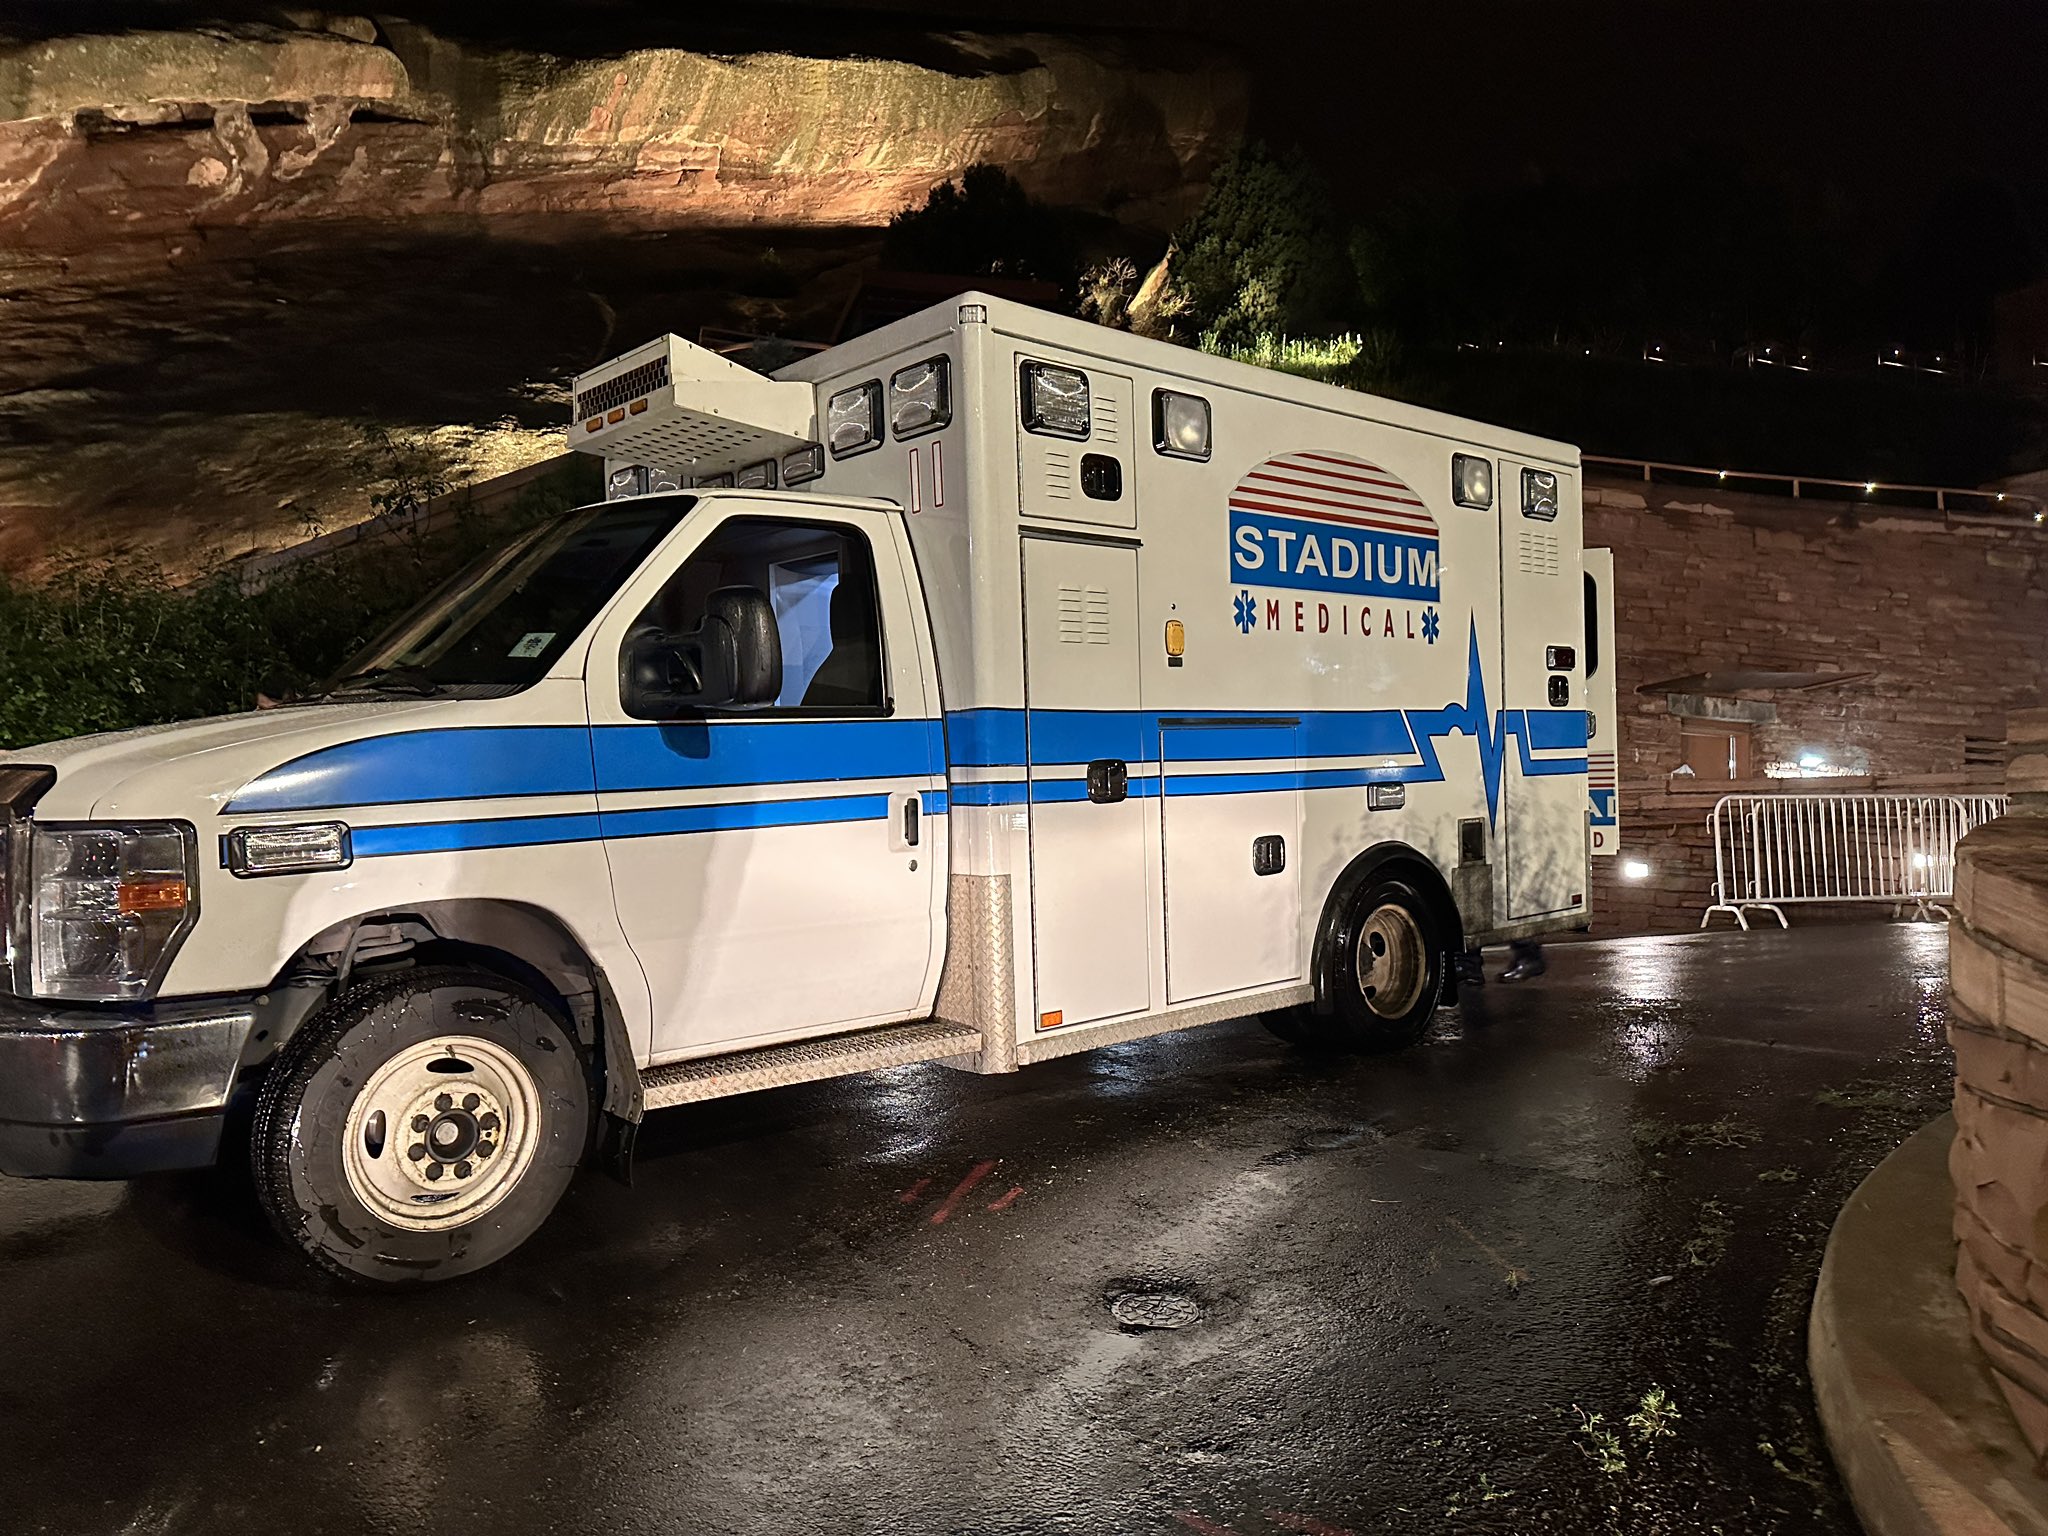 Medical crews at Red Rocks amphitheater treated 80 to 90 people who were injured during a mid-concert hail storm. Injuries ranged from cuts to broken bones.